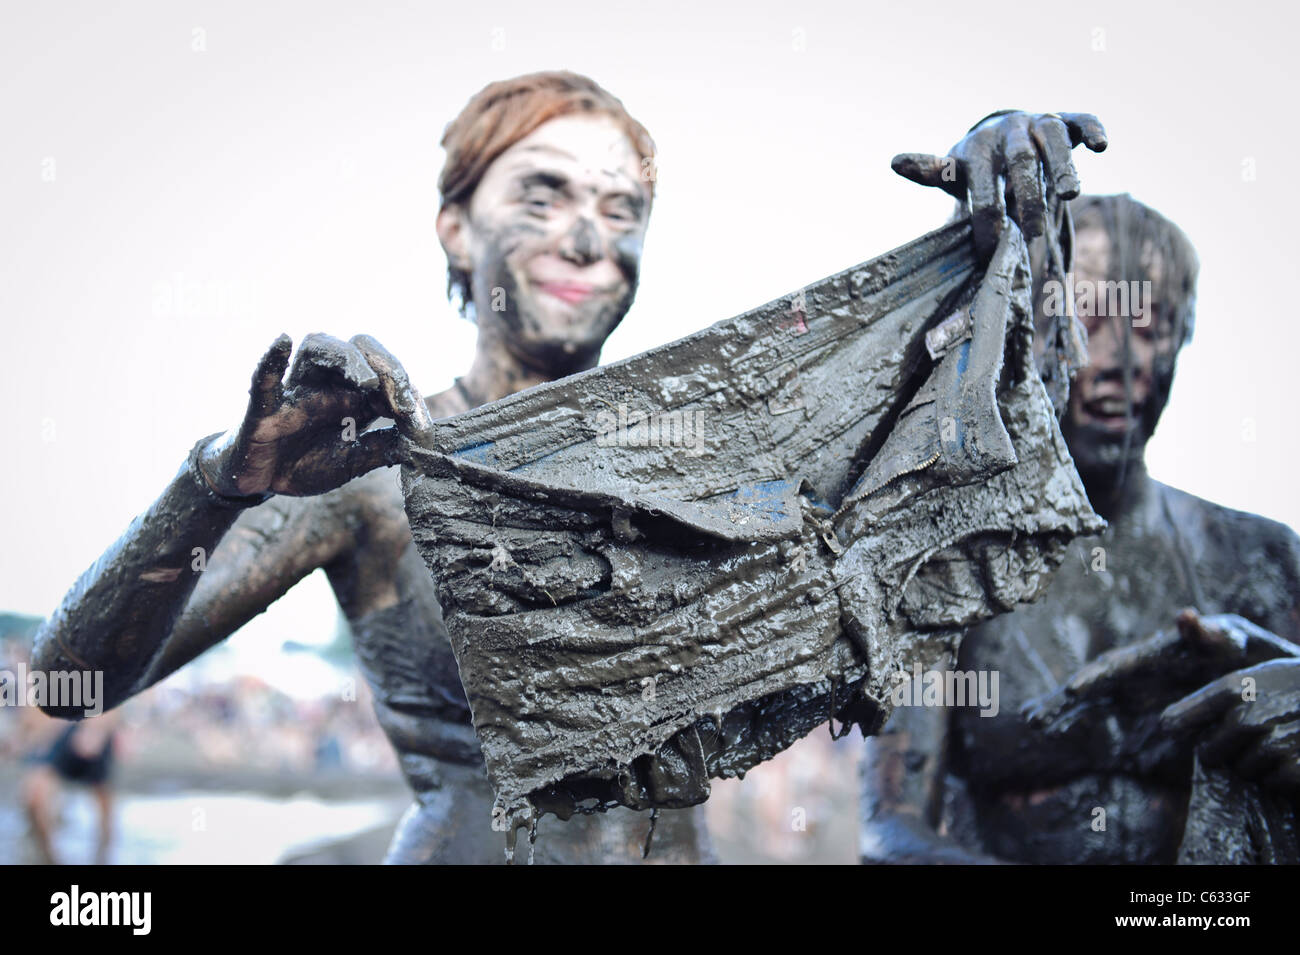 woman showing her clothes covered in mud at the Przystanek Woodstock ...